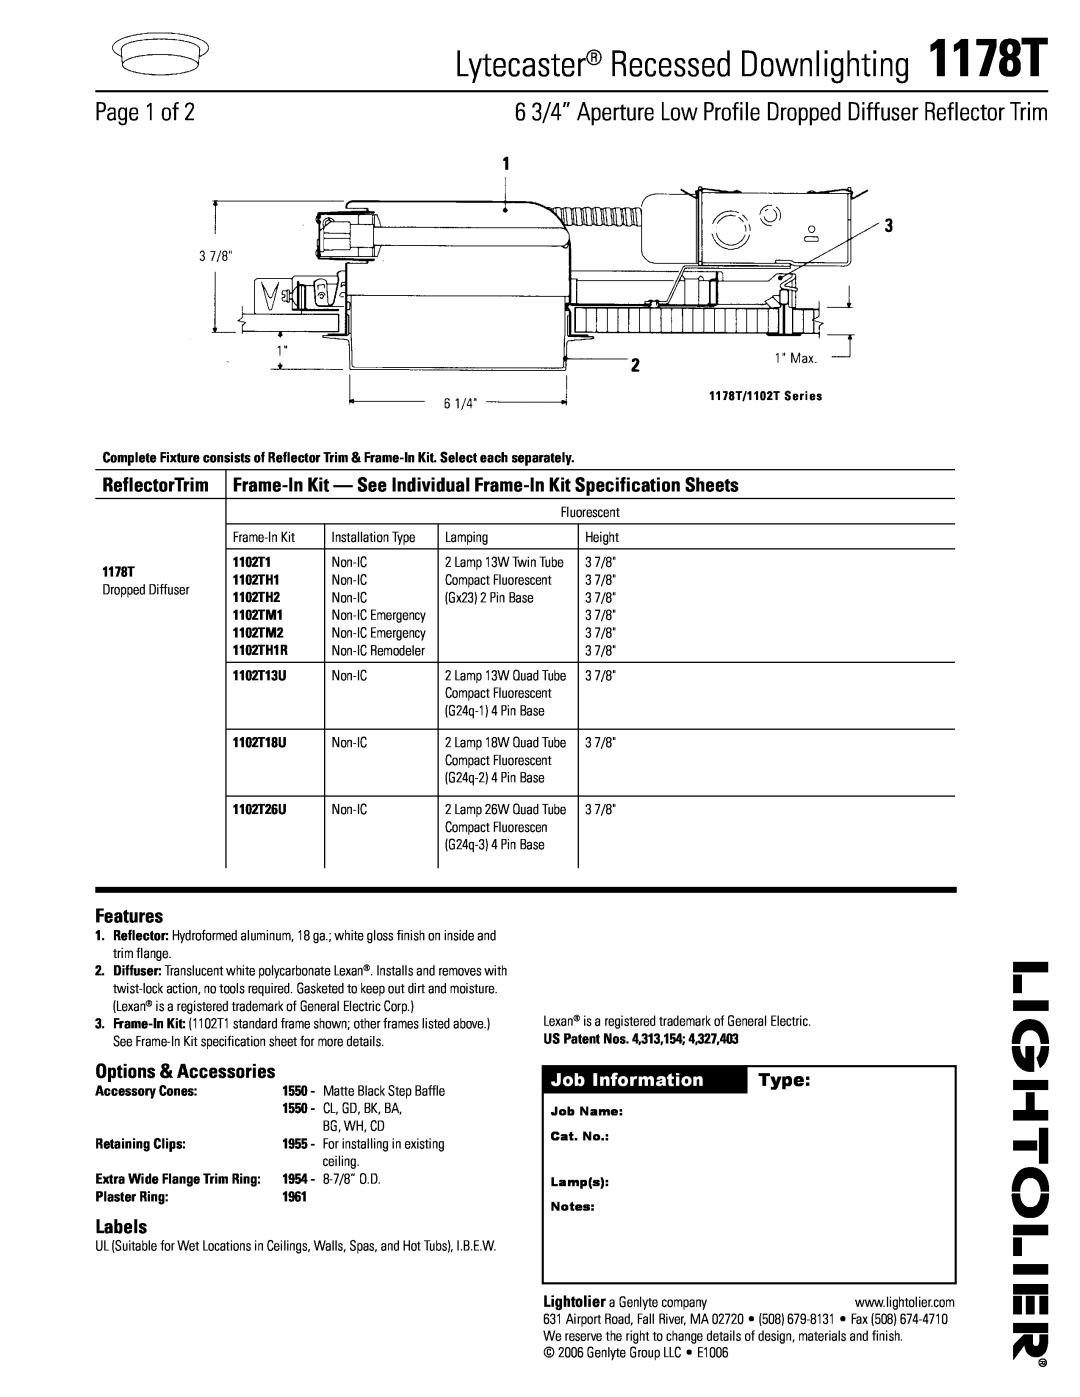 Lightolier specifications Lytecaster Recessed Downlighting 1178T, Page  of, Job Information, Type, Features, Labels 